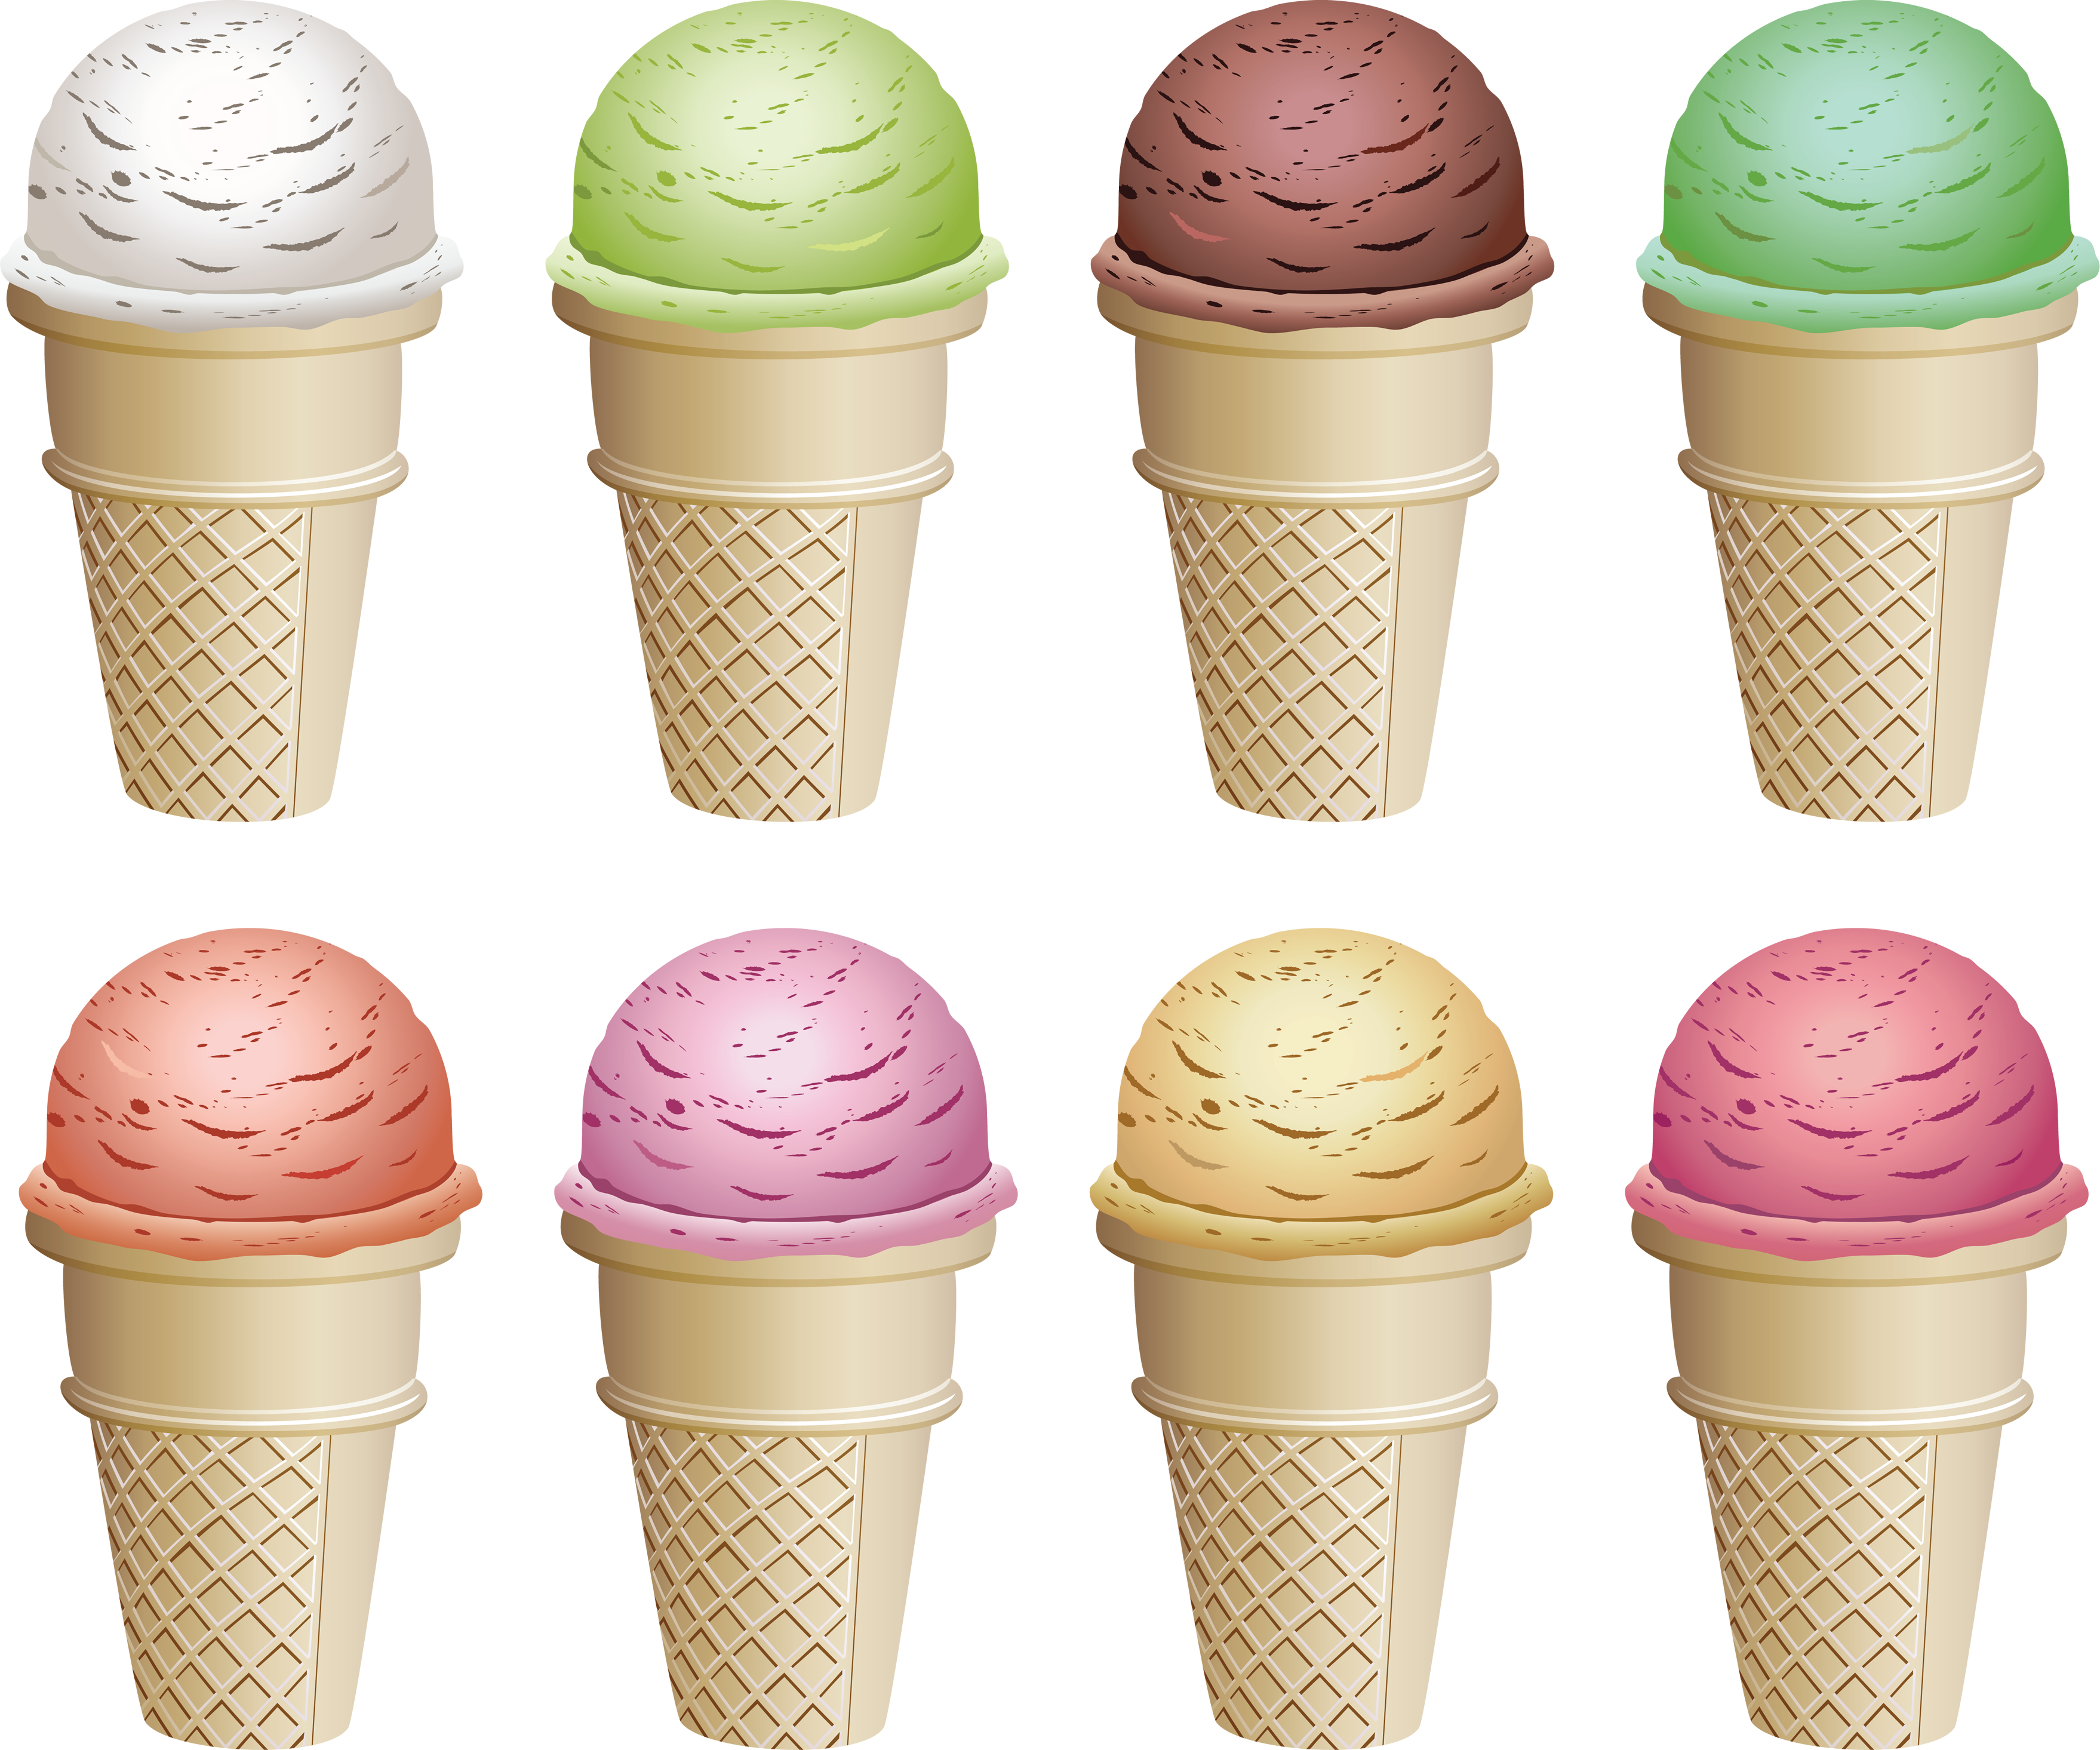 What flavor ice cream are you?